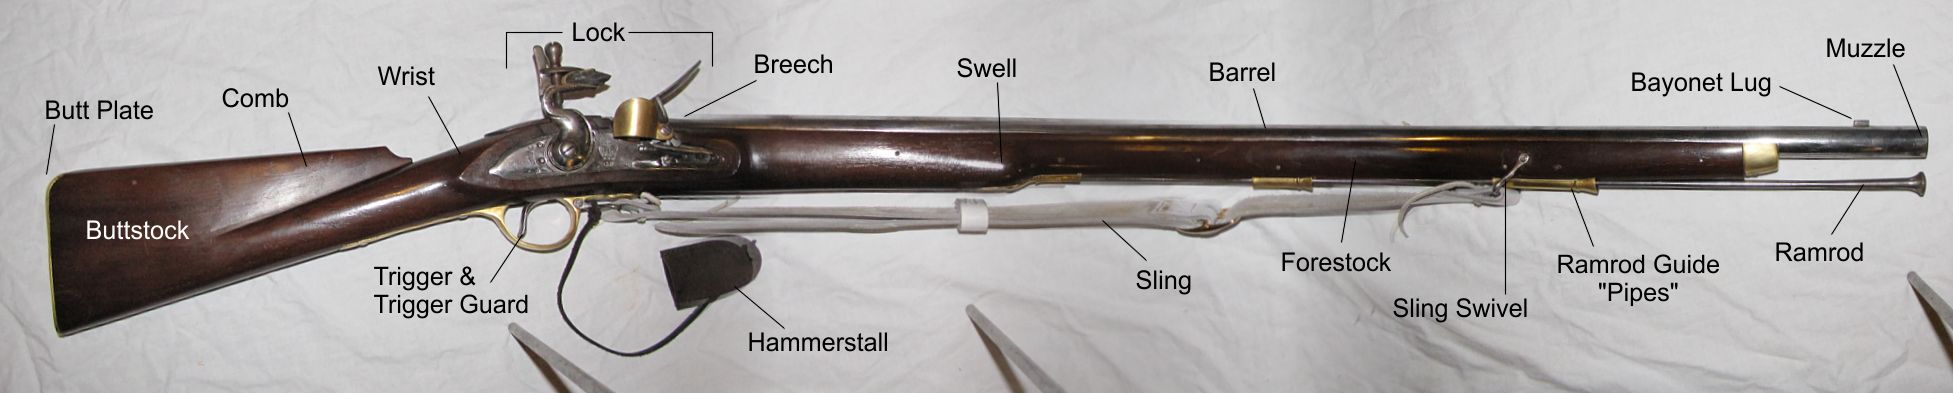 Image result for brown bess musket